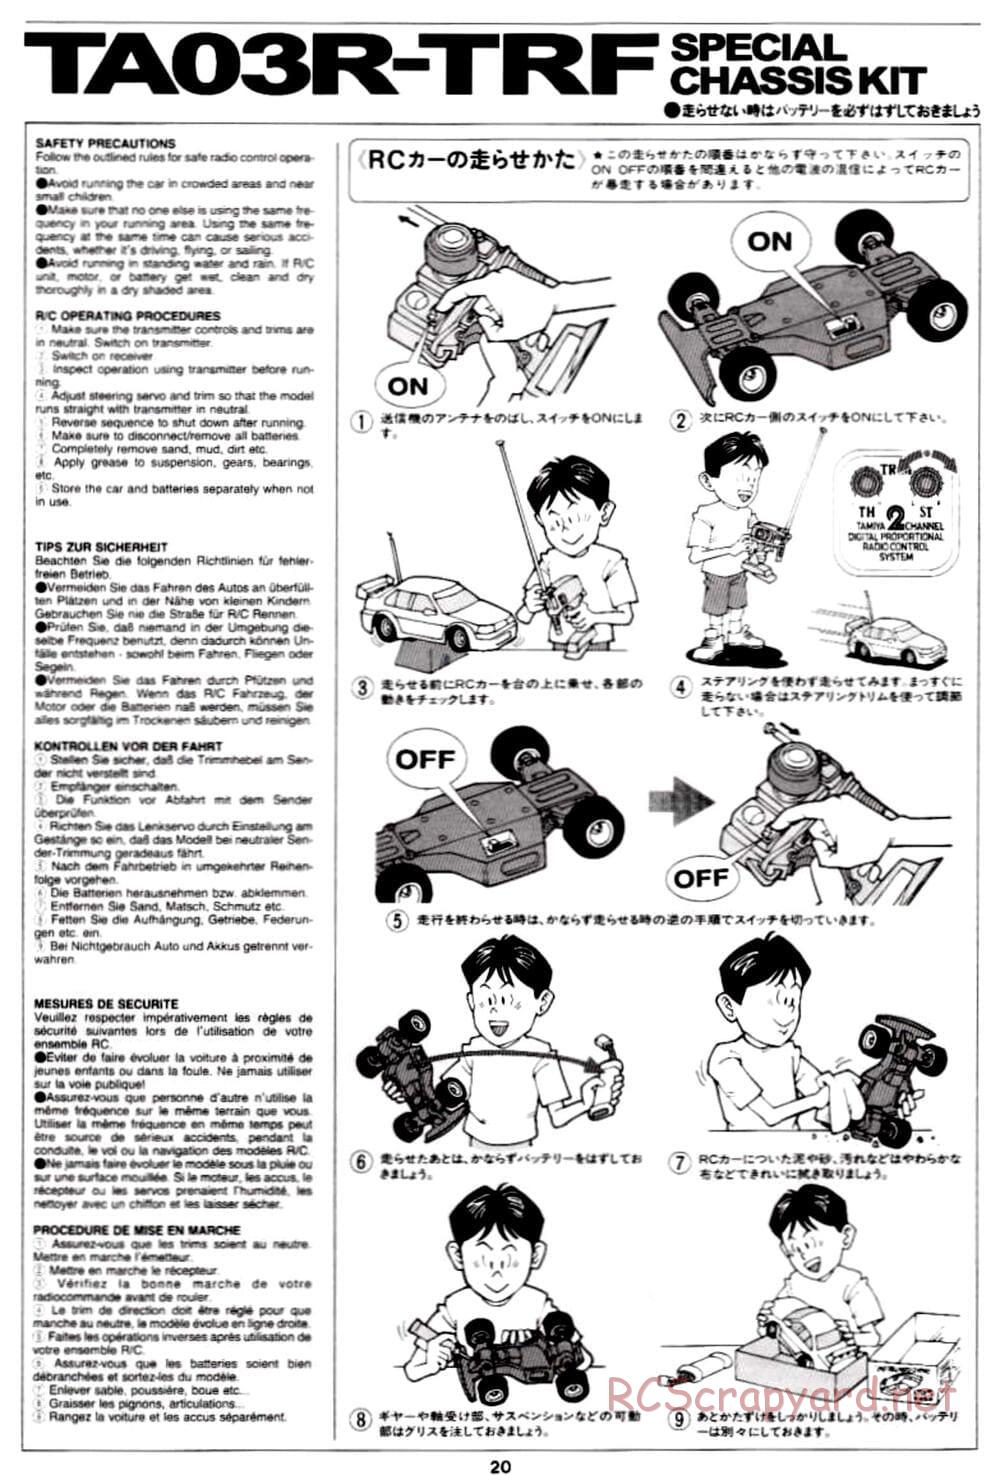 Tamiya - TA-03R TRF Special Edition Chassis - Manual - Page 20